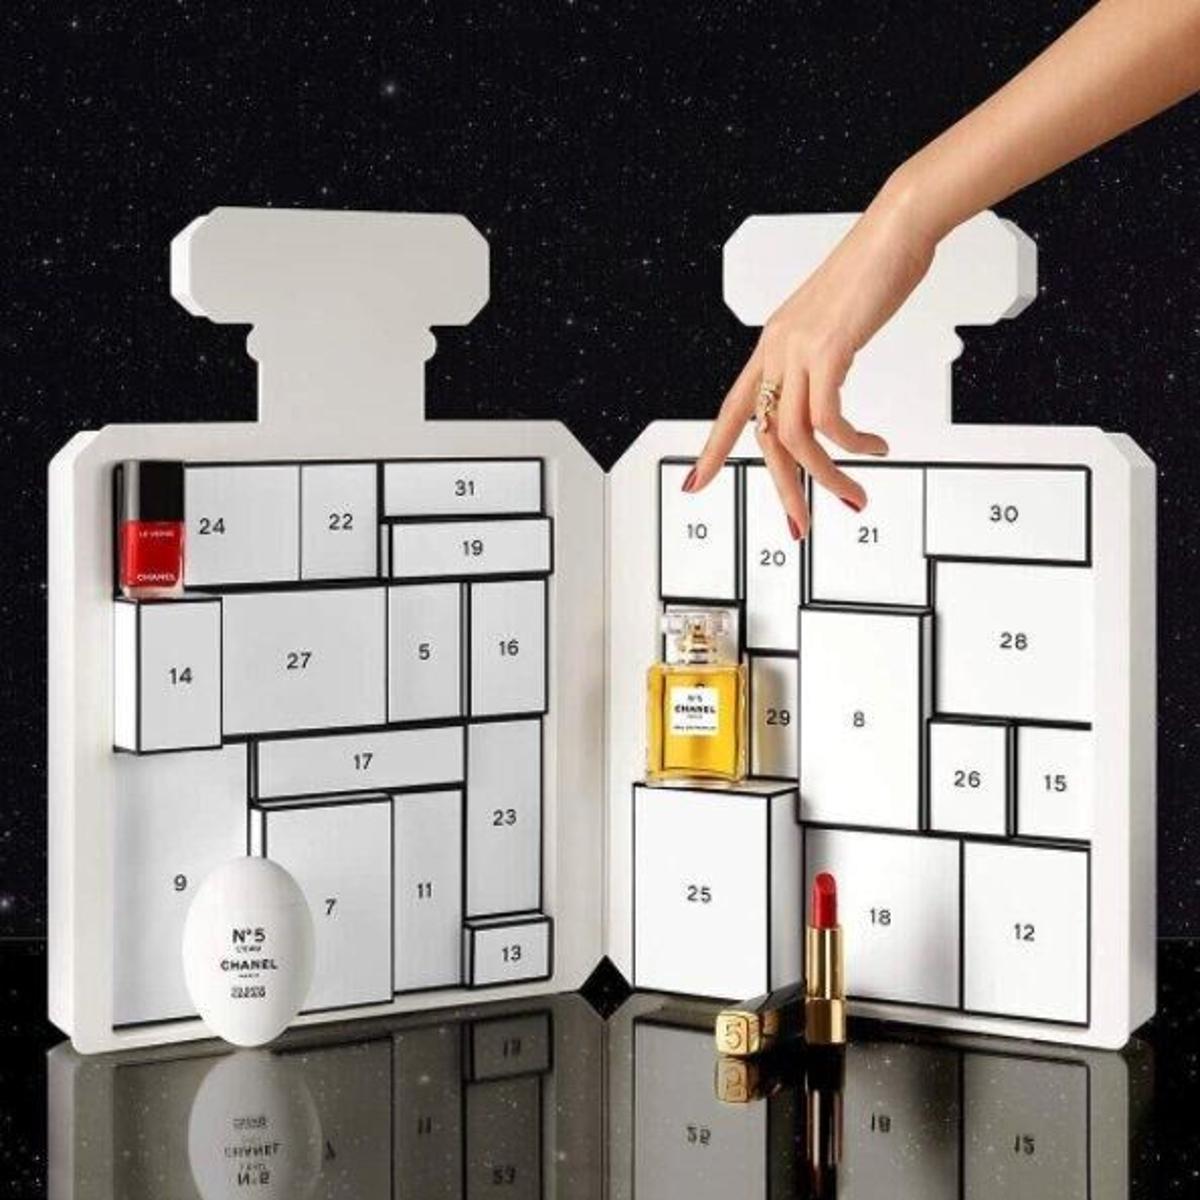 Chanel Just Dropped Their $850 First Advent Calendar Ever!